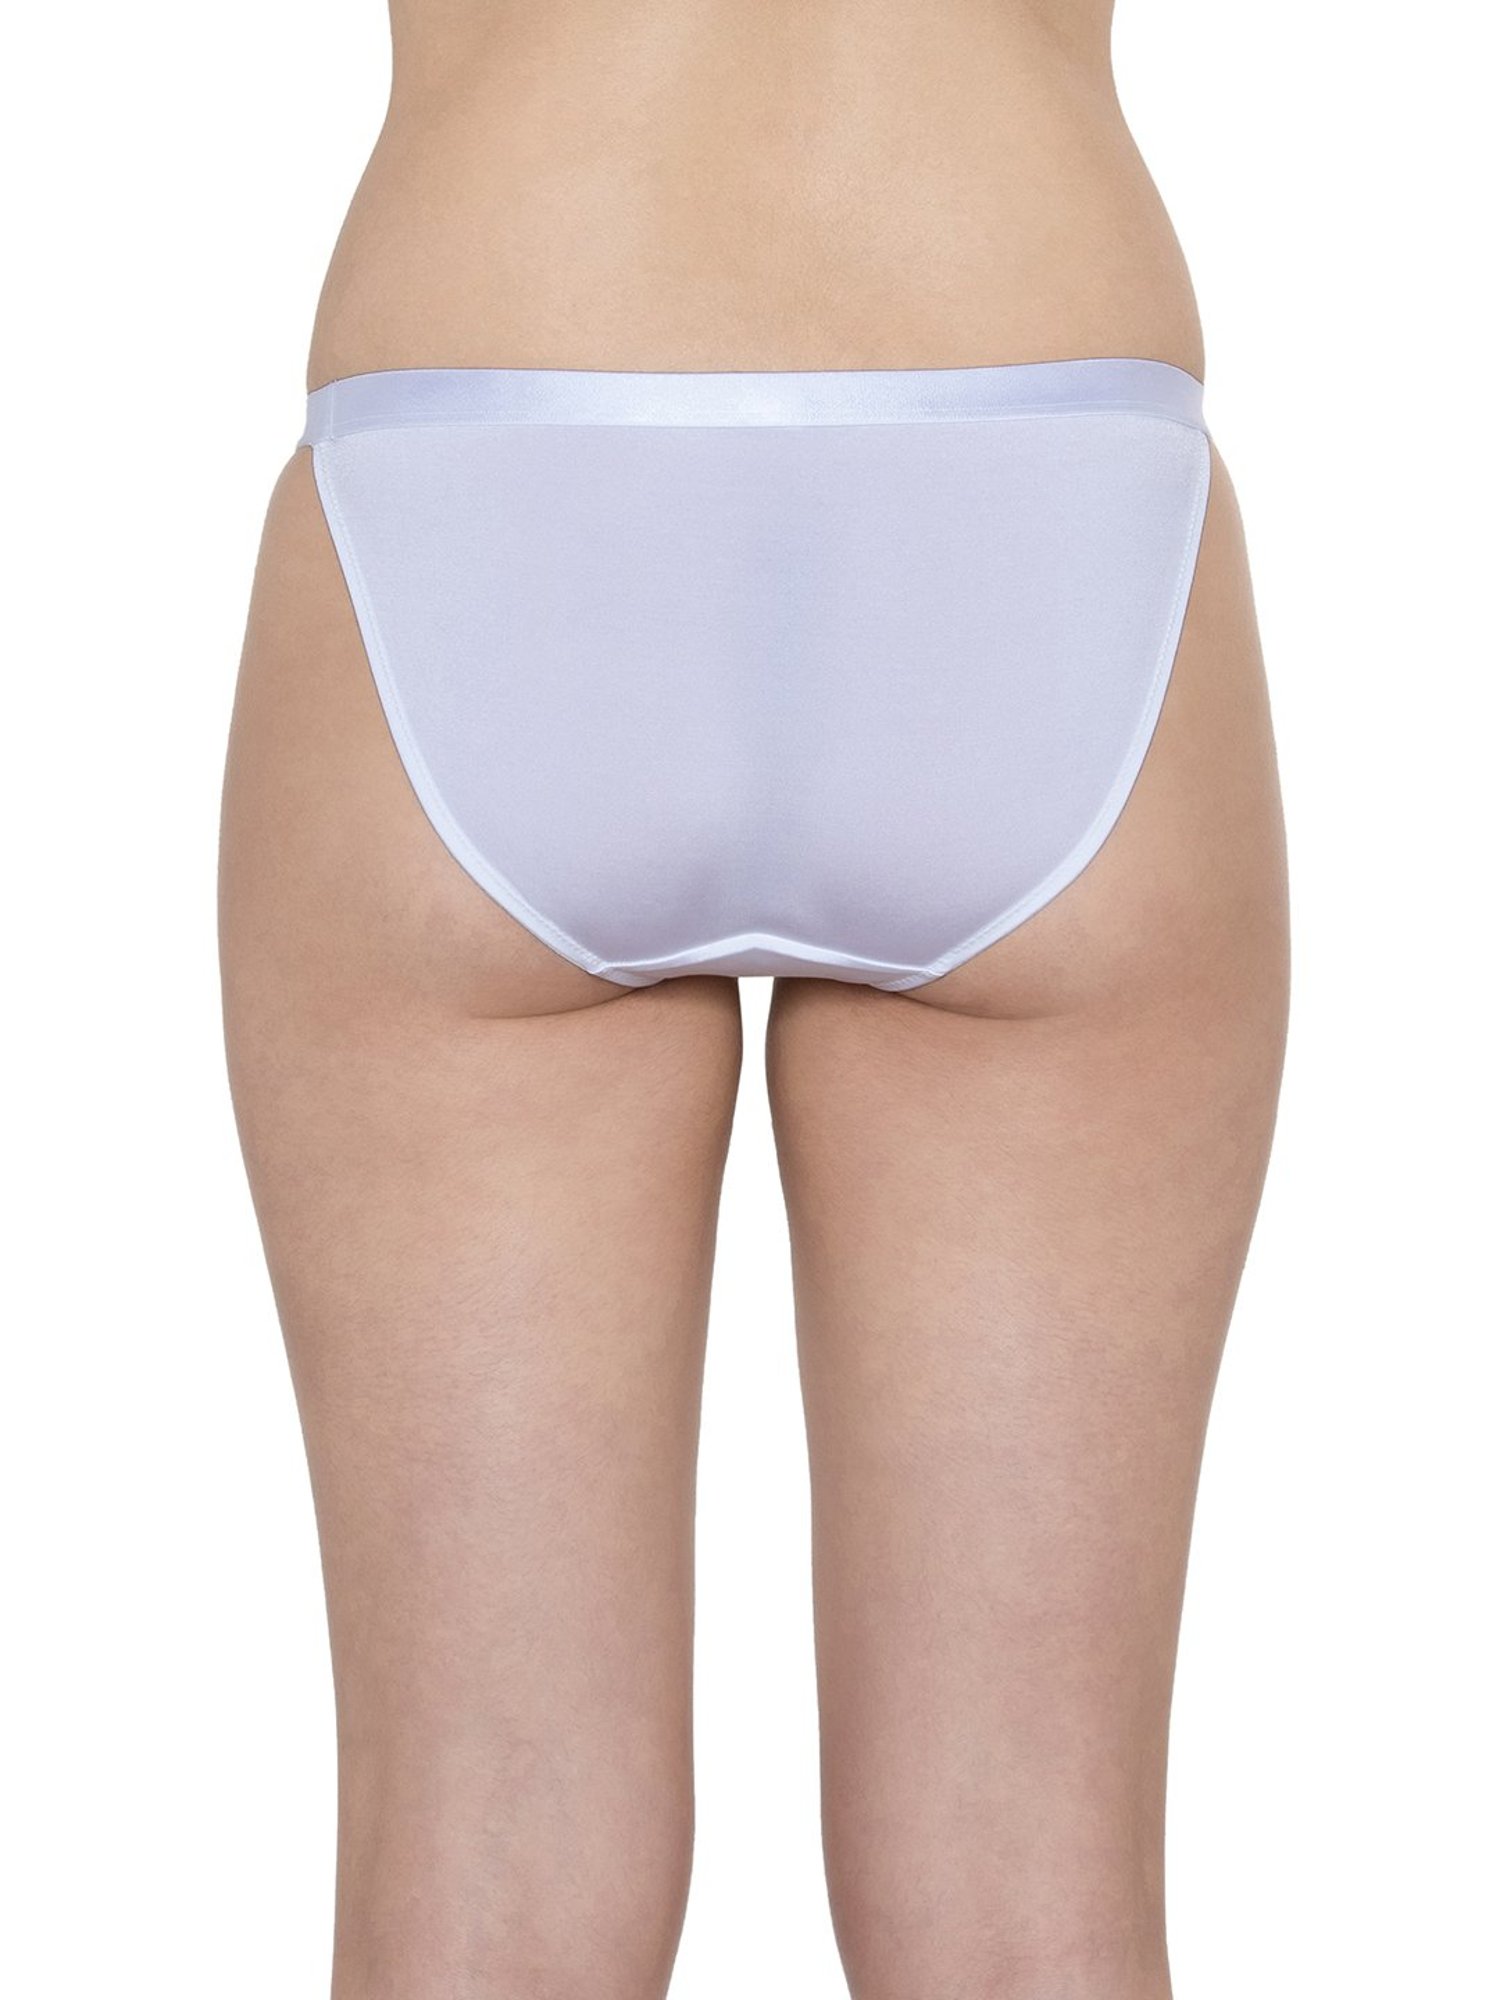 Buy Triumph Everyday Fancy Lace Tanga Brief - Blue Online